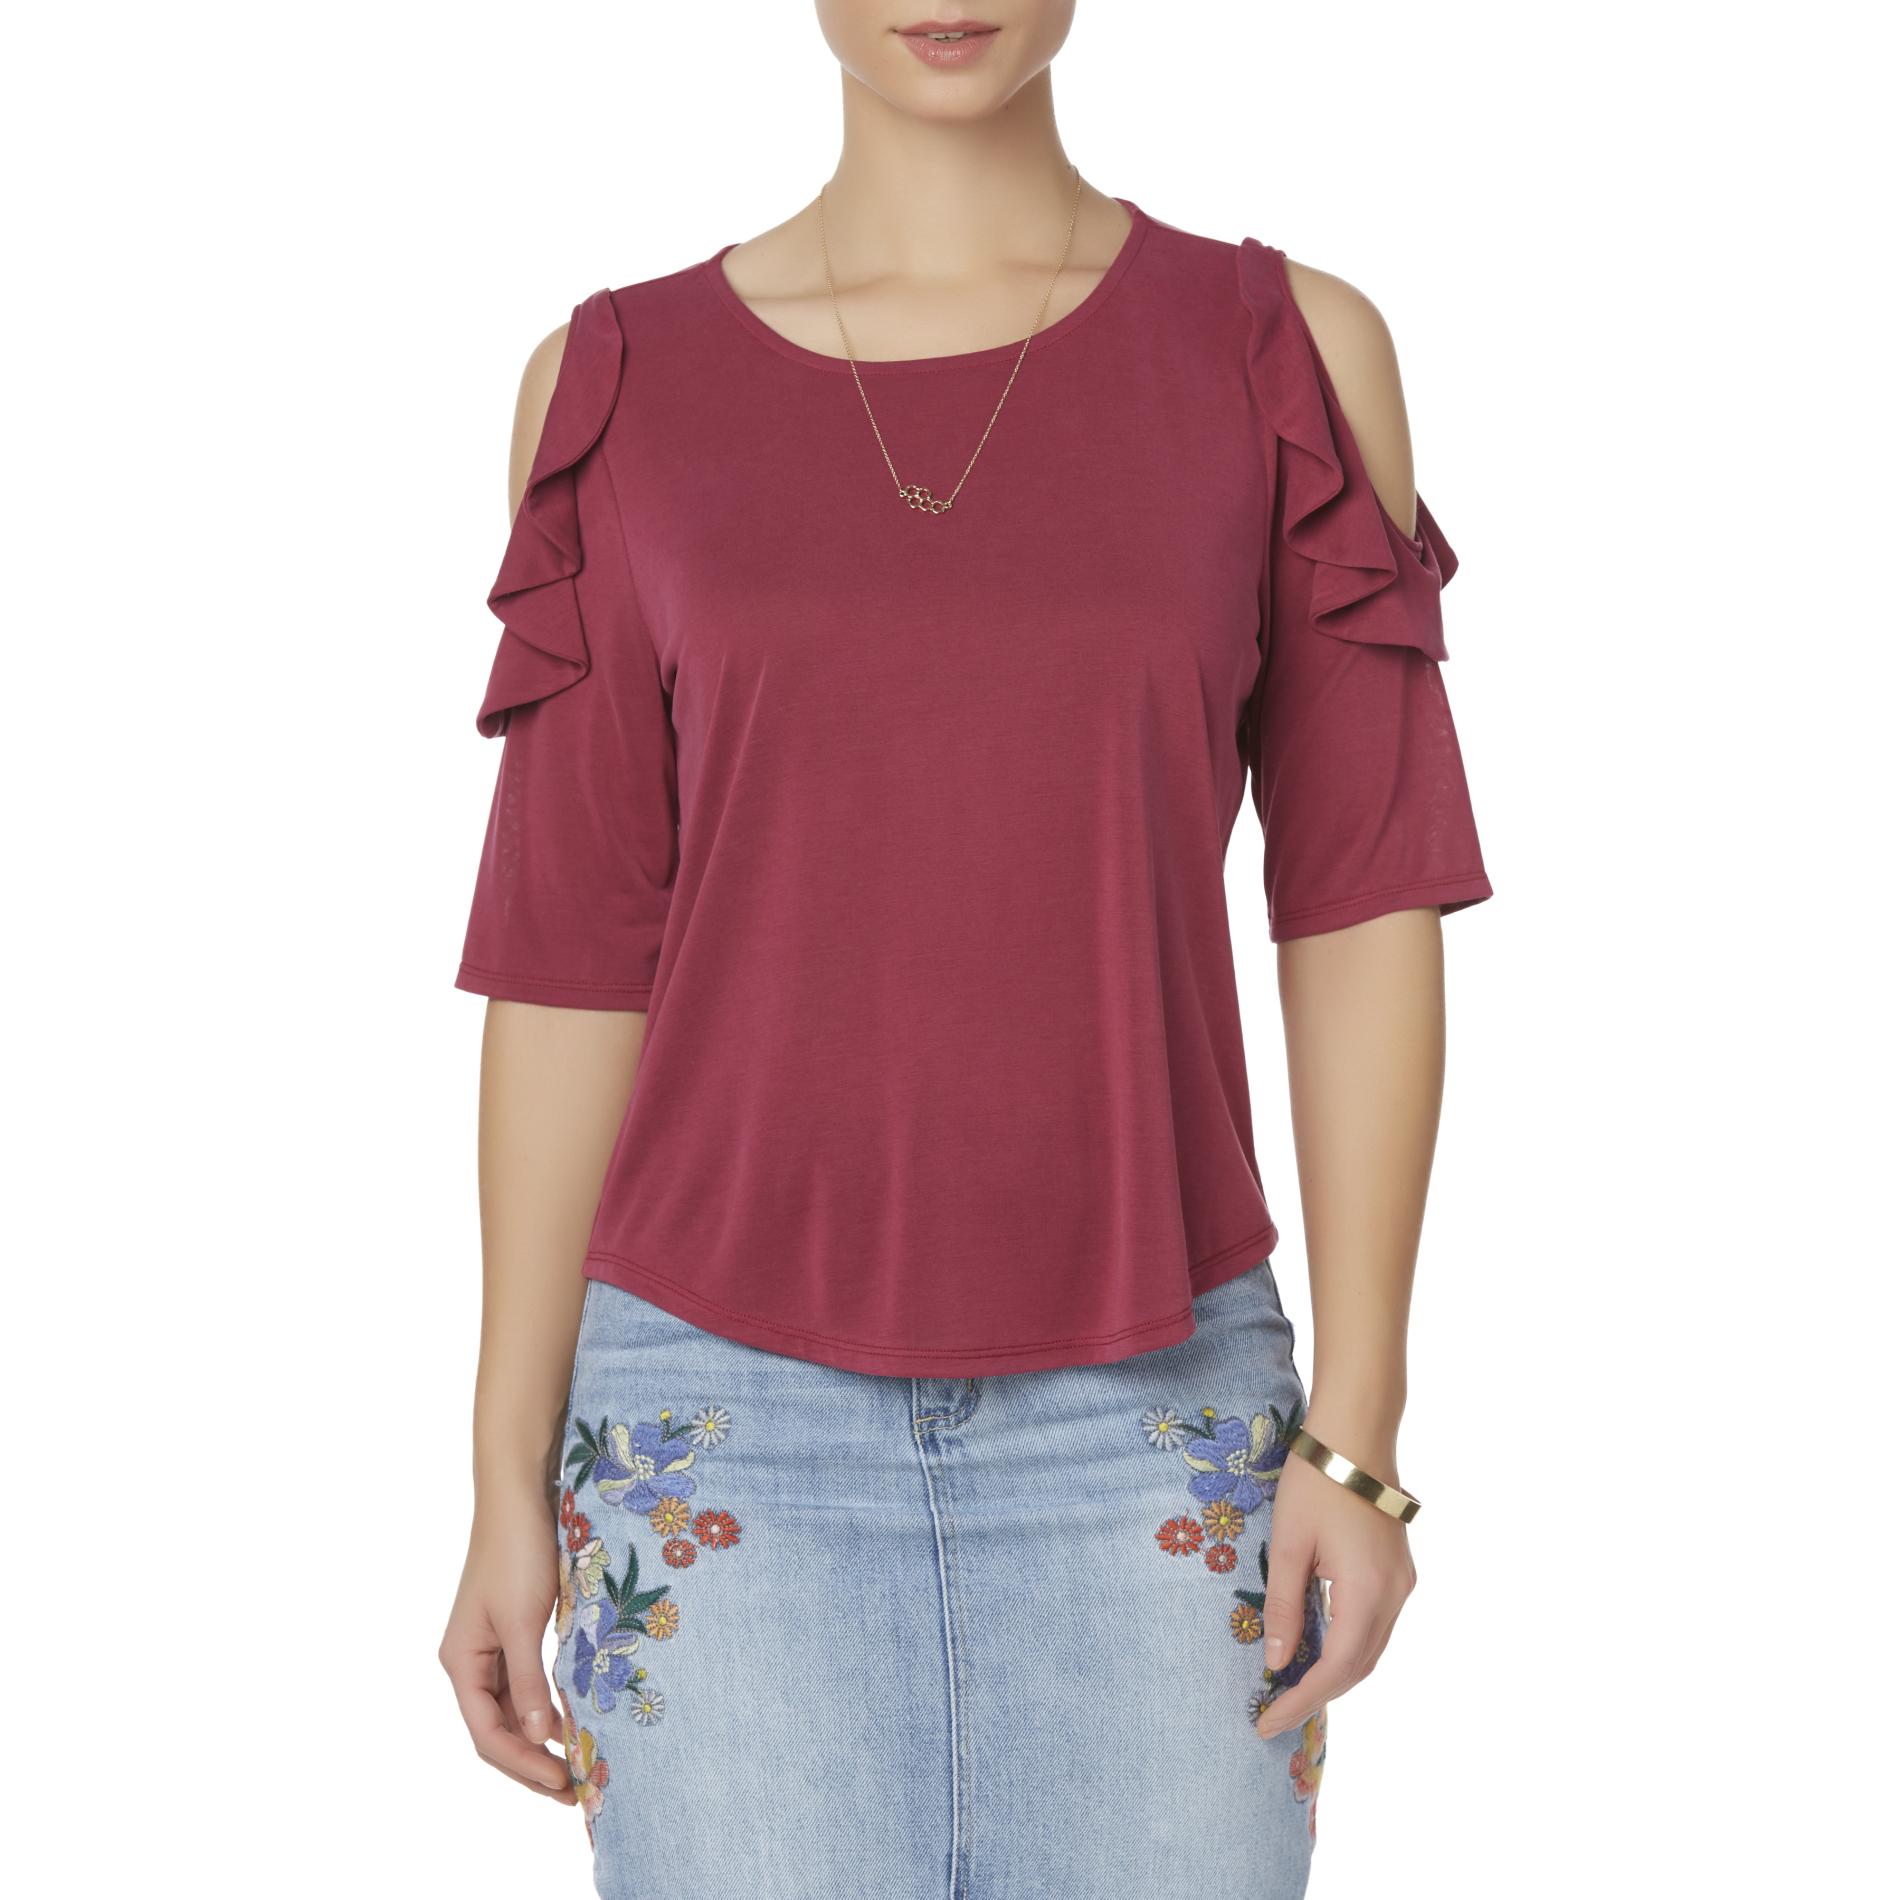 Simply Styled Women's Cold Shoulder Top